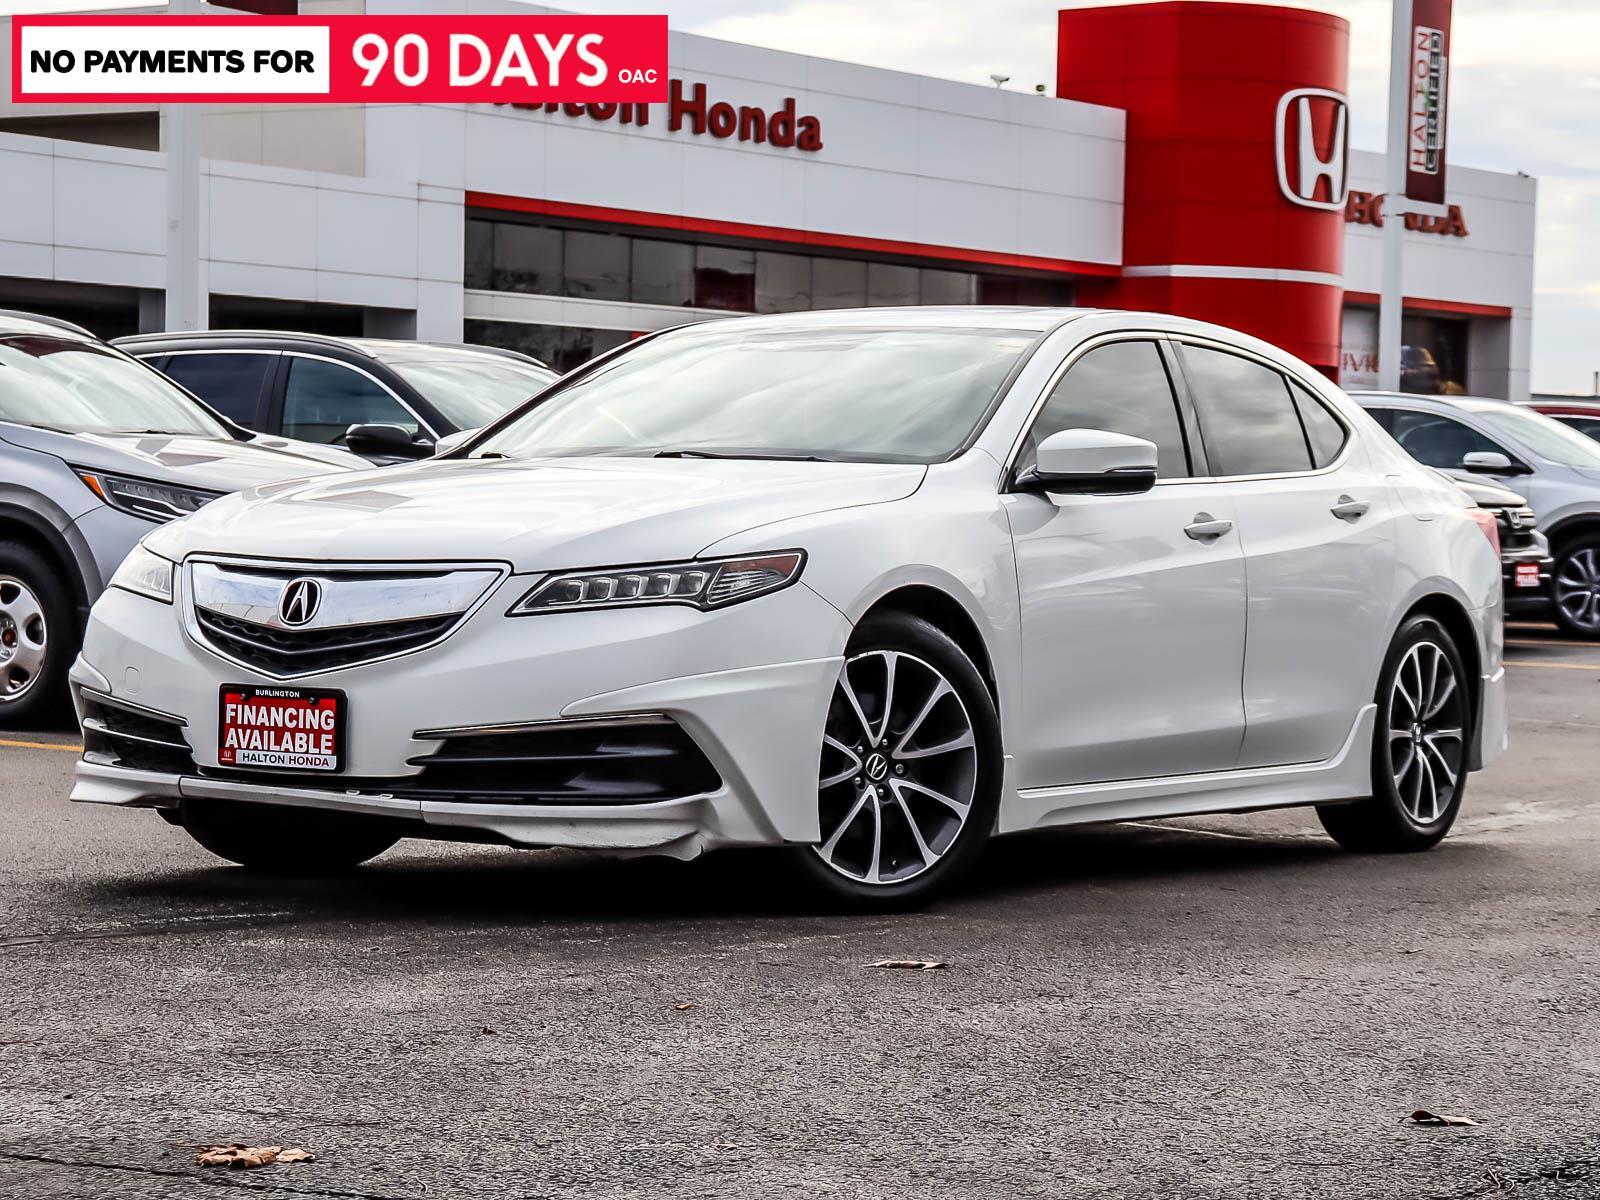 2015 Acura TLX SH-AWD  w/ TECHNOLOGY PACKAGE  |  POWER MOONROOF  